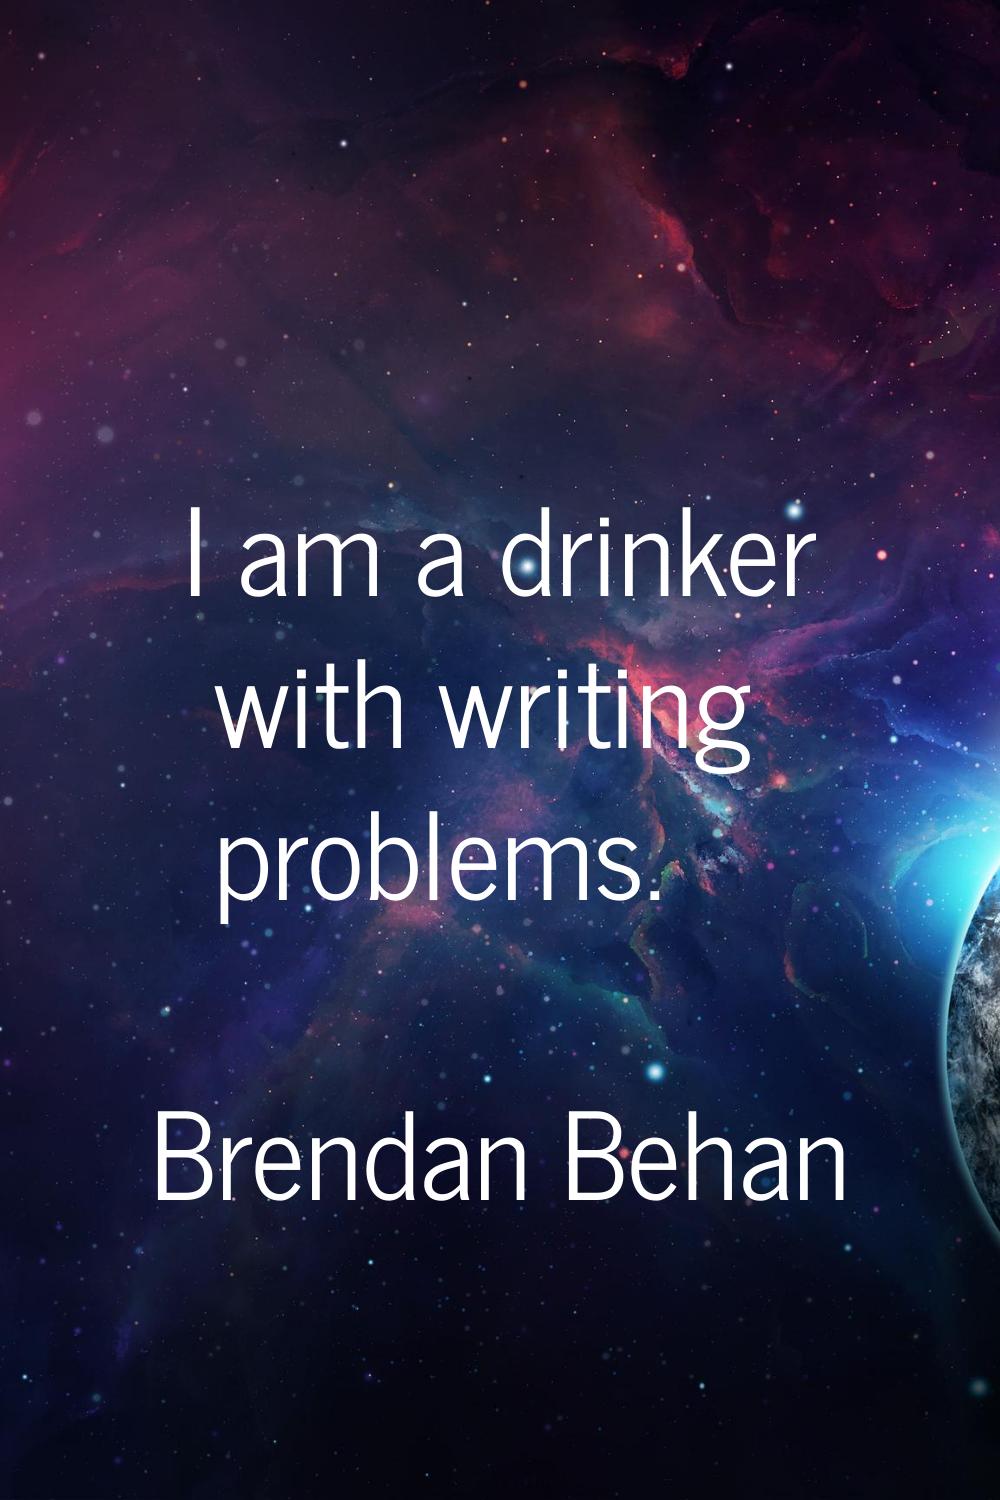 I am a drinker with writing problems.